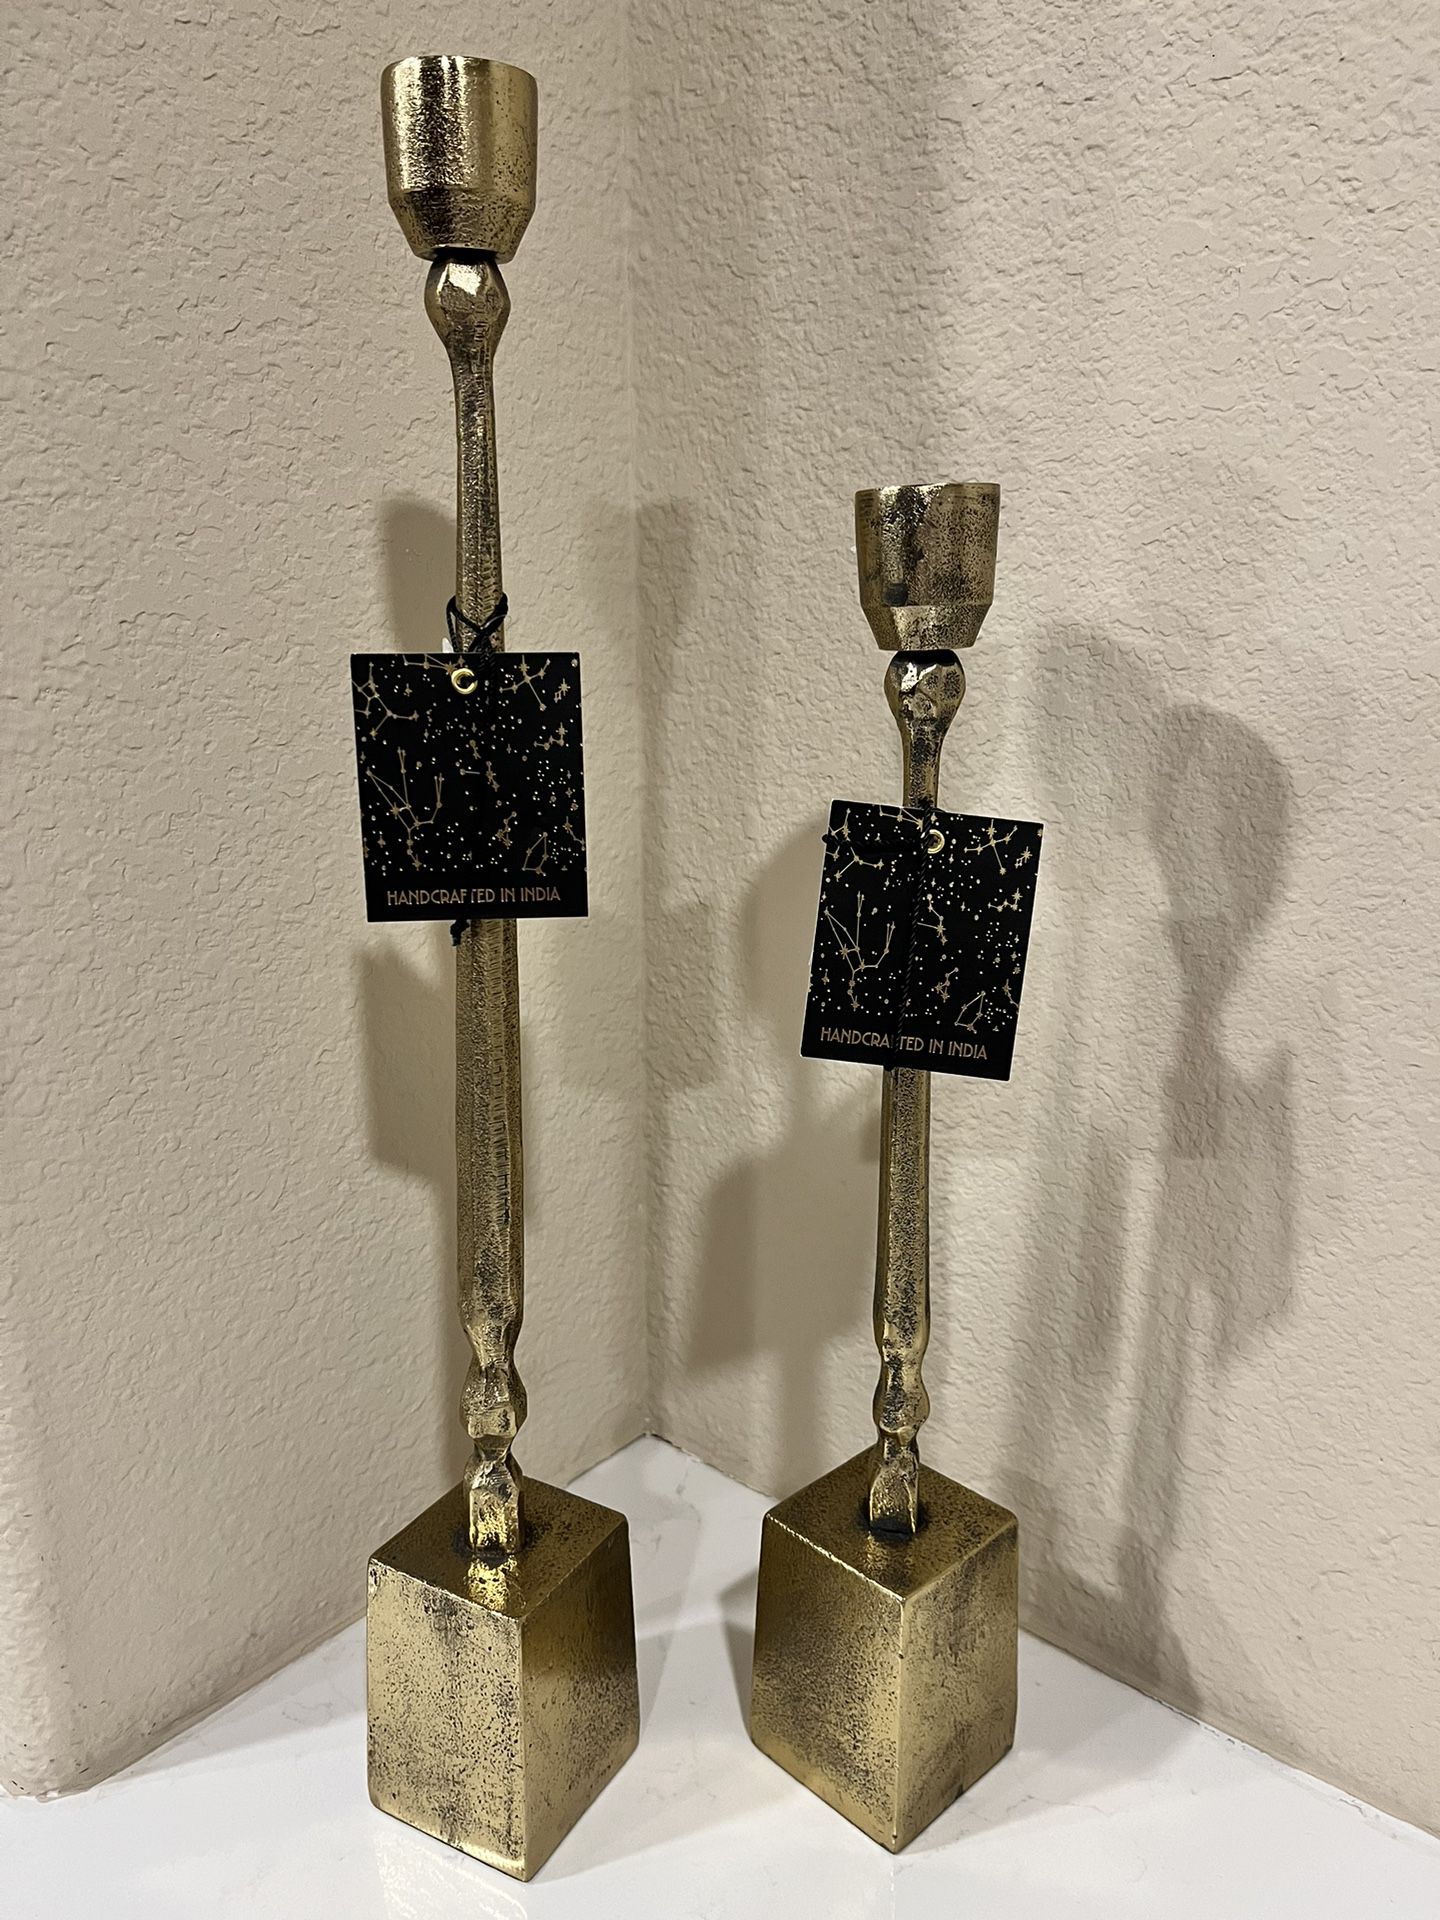 2-NWT HANDCRAFTED GOLD/BRASS PILLAR CANDLE HOLDER